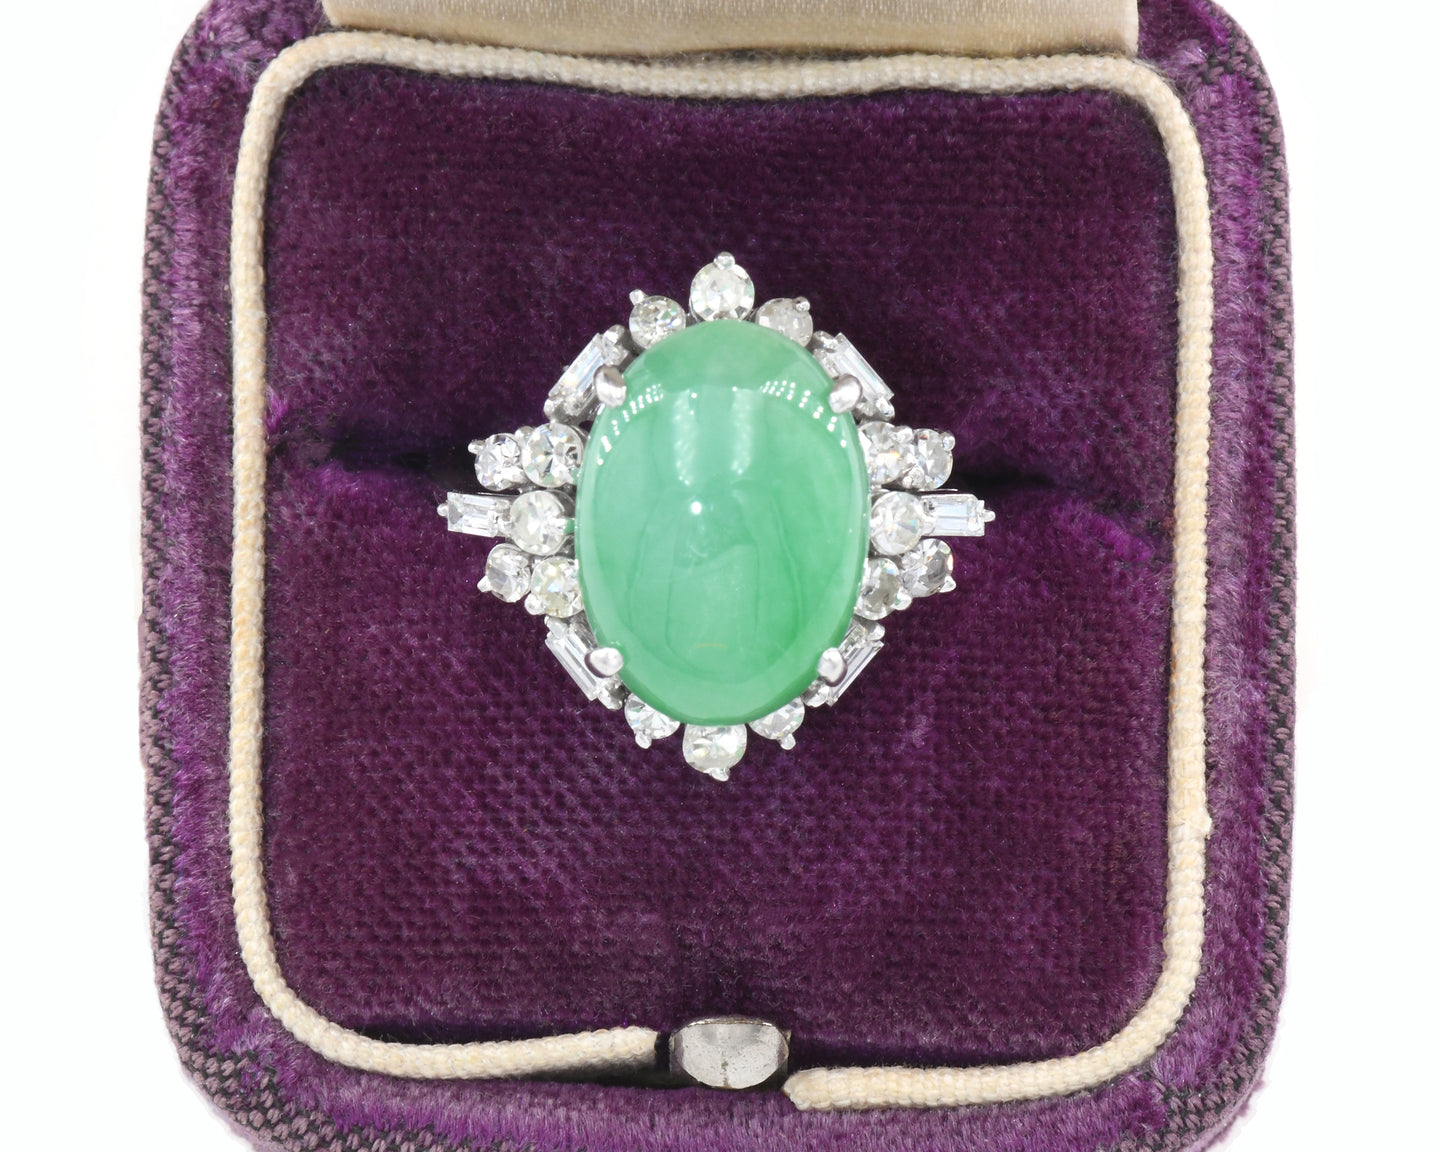 Vintage 14K White Gold Jade and Diamond Ring in box.